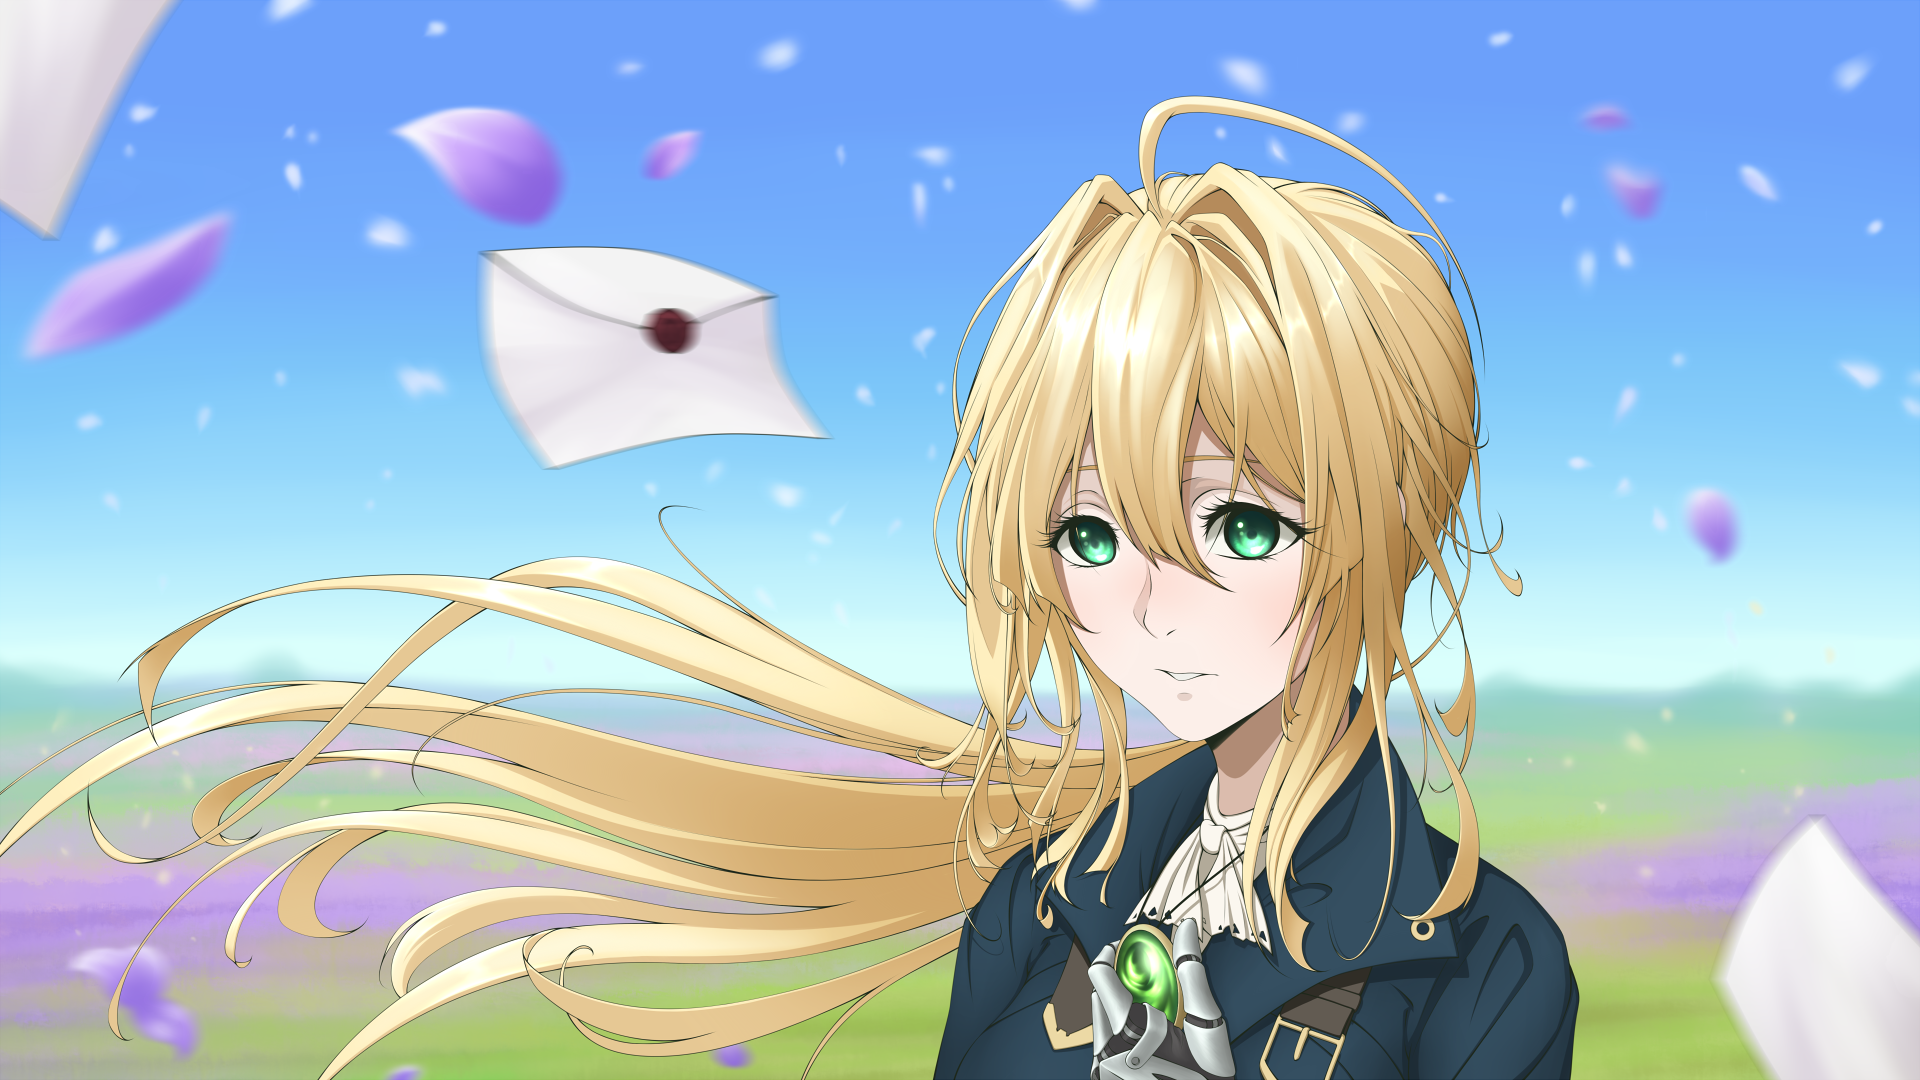 free download violet evergarden recollections